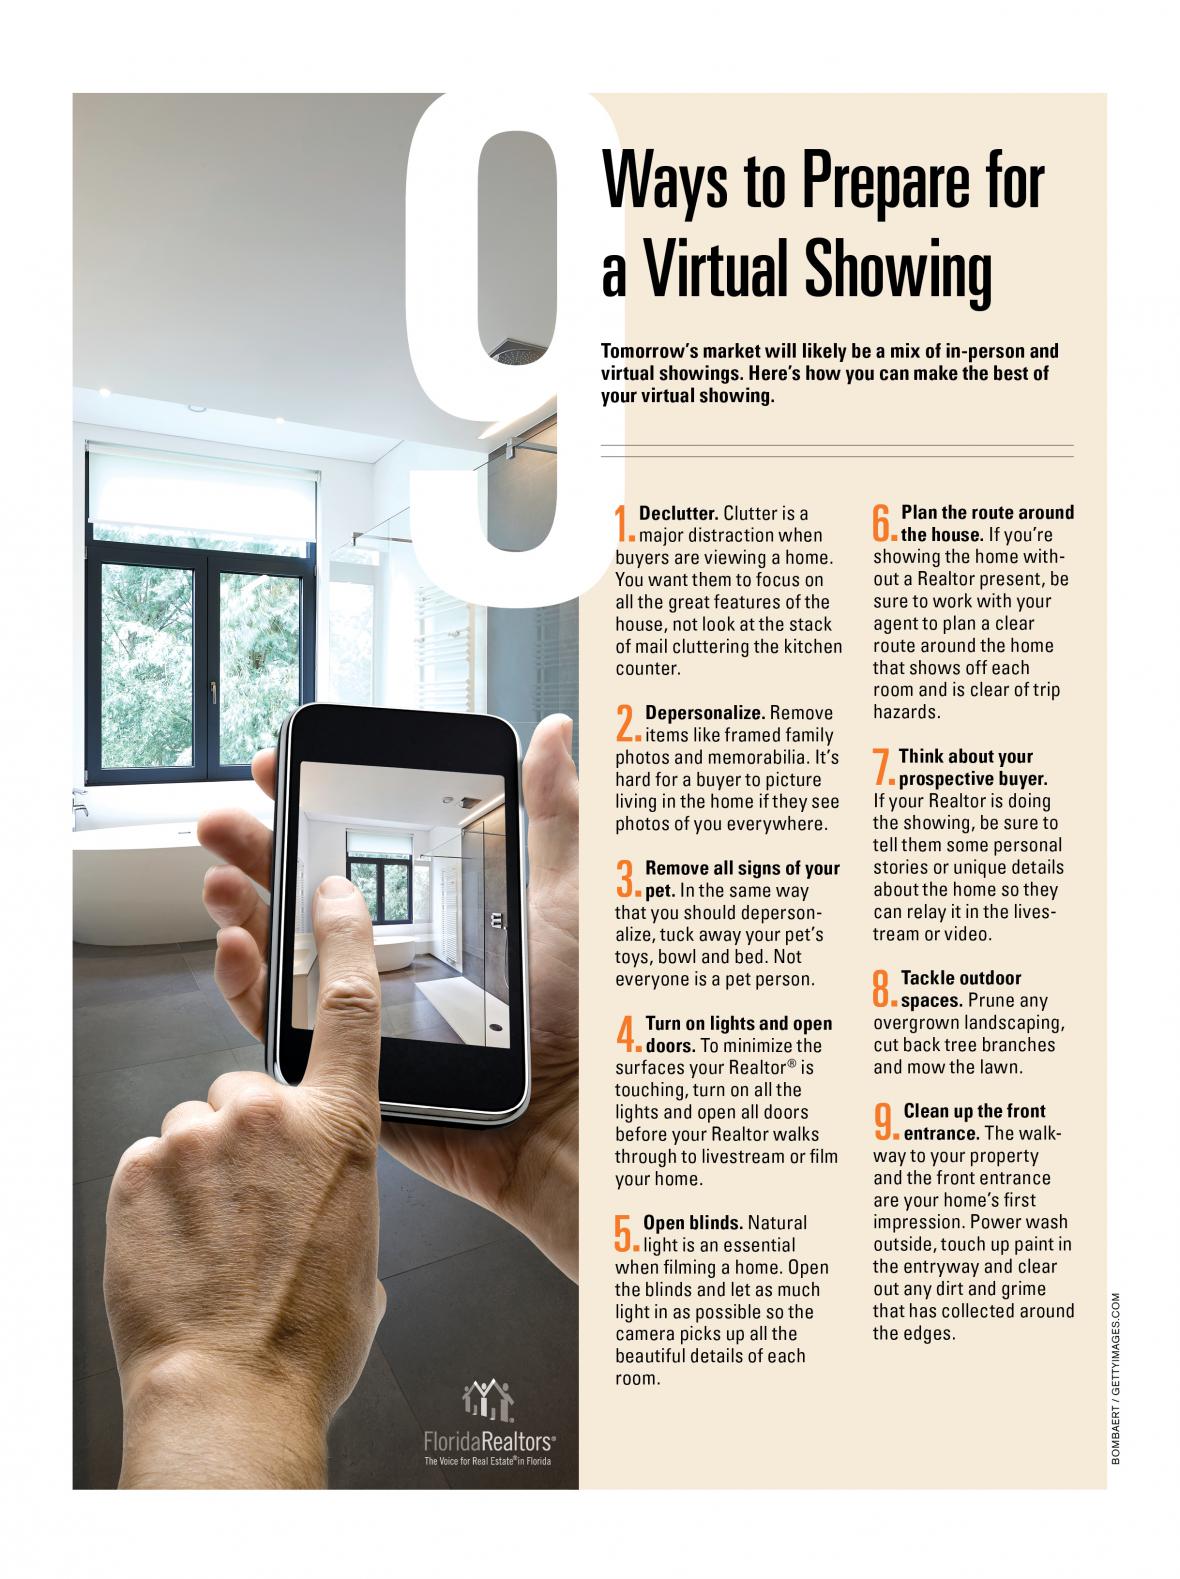 9 Ways to Prepare for a Virtual Showing infographic